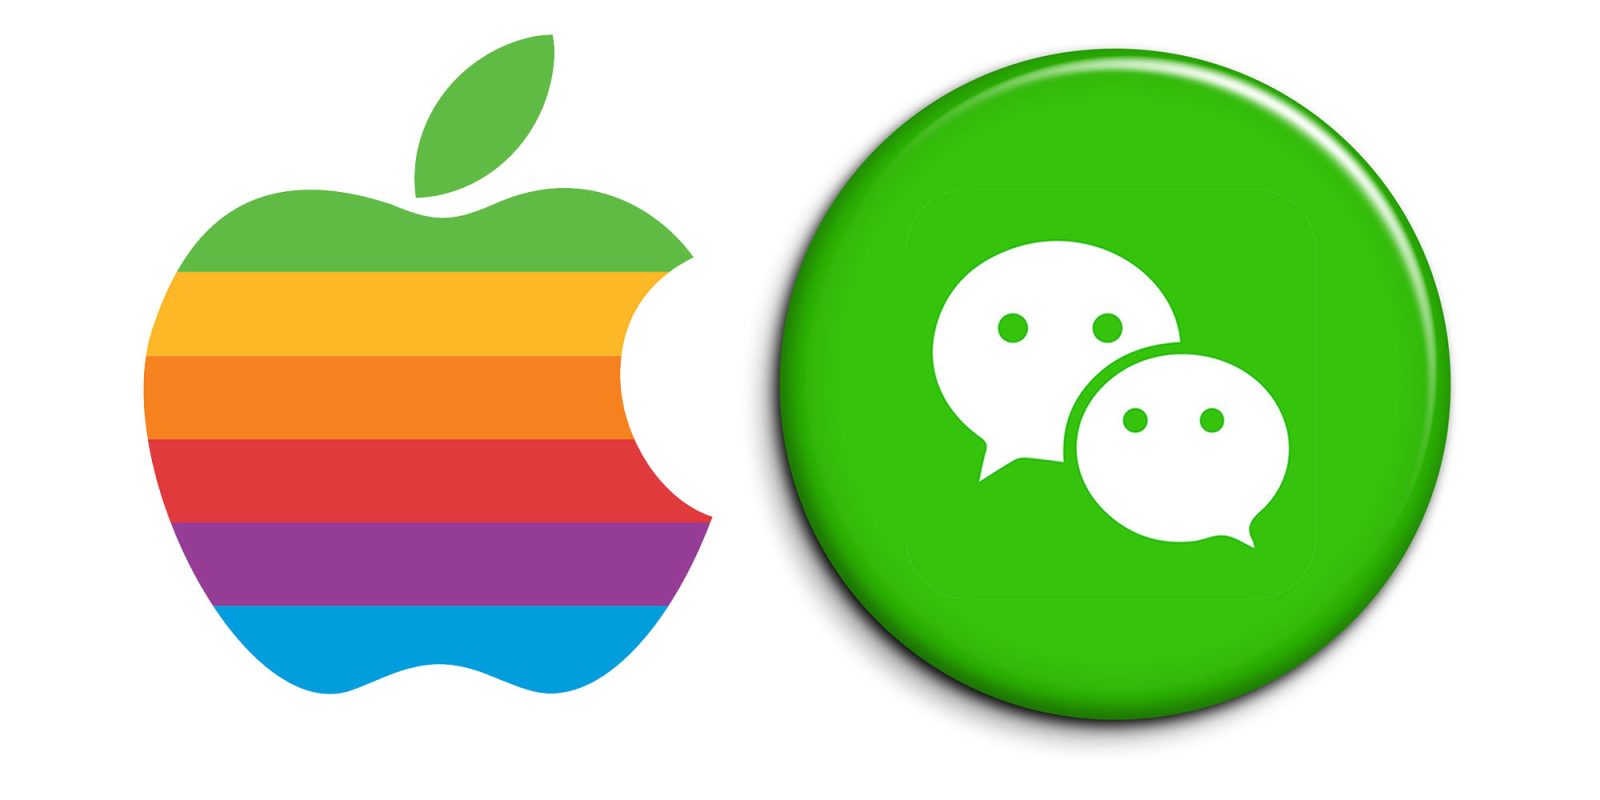 Apple trying to pressure WeChat | Stylized Apple and WeChat logos